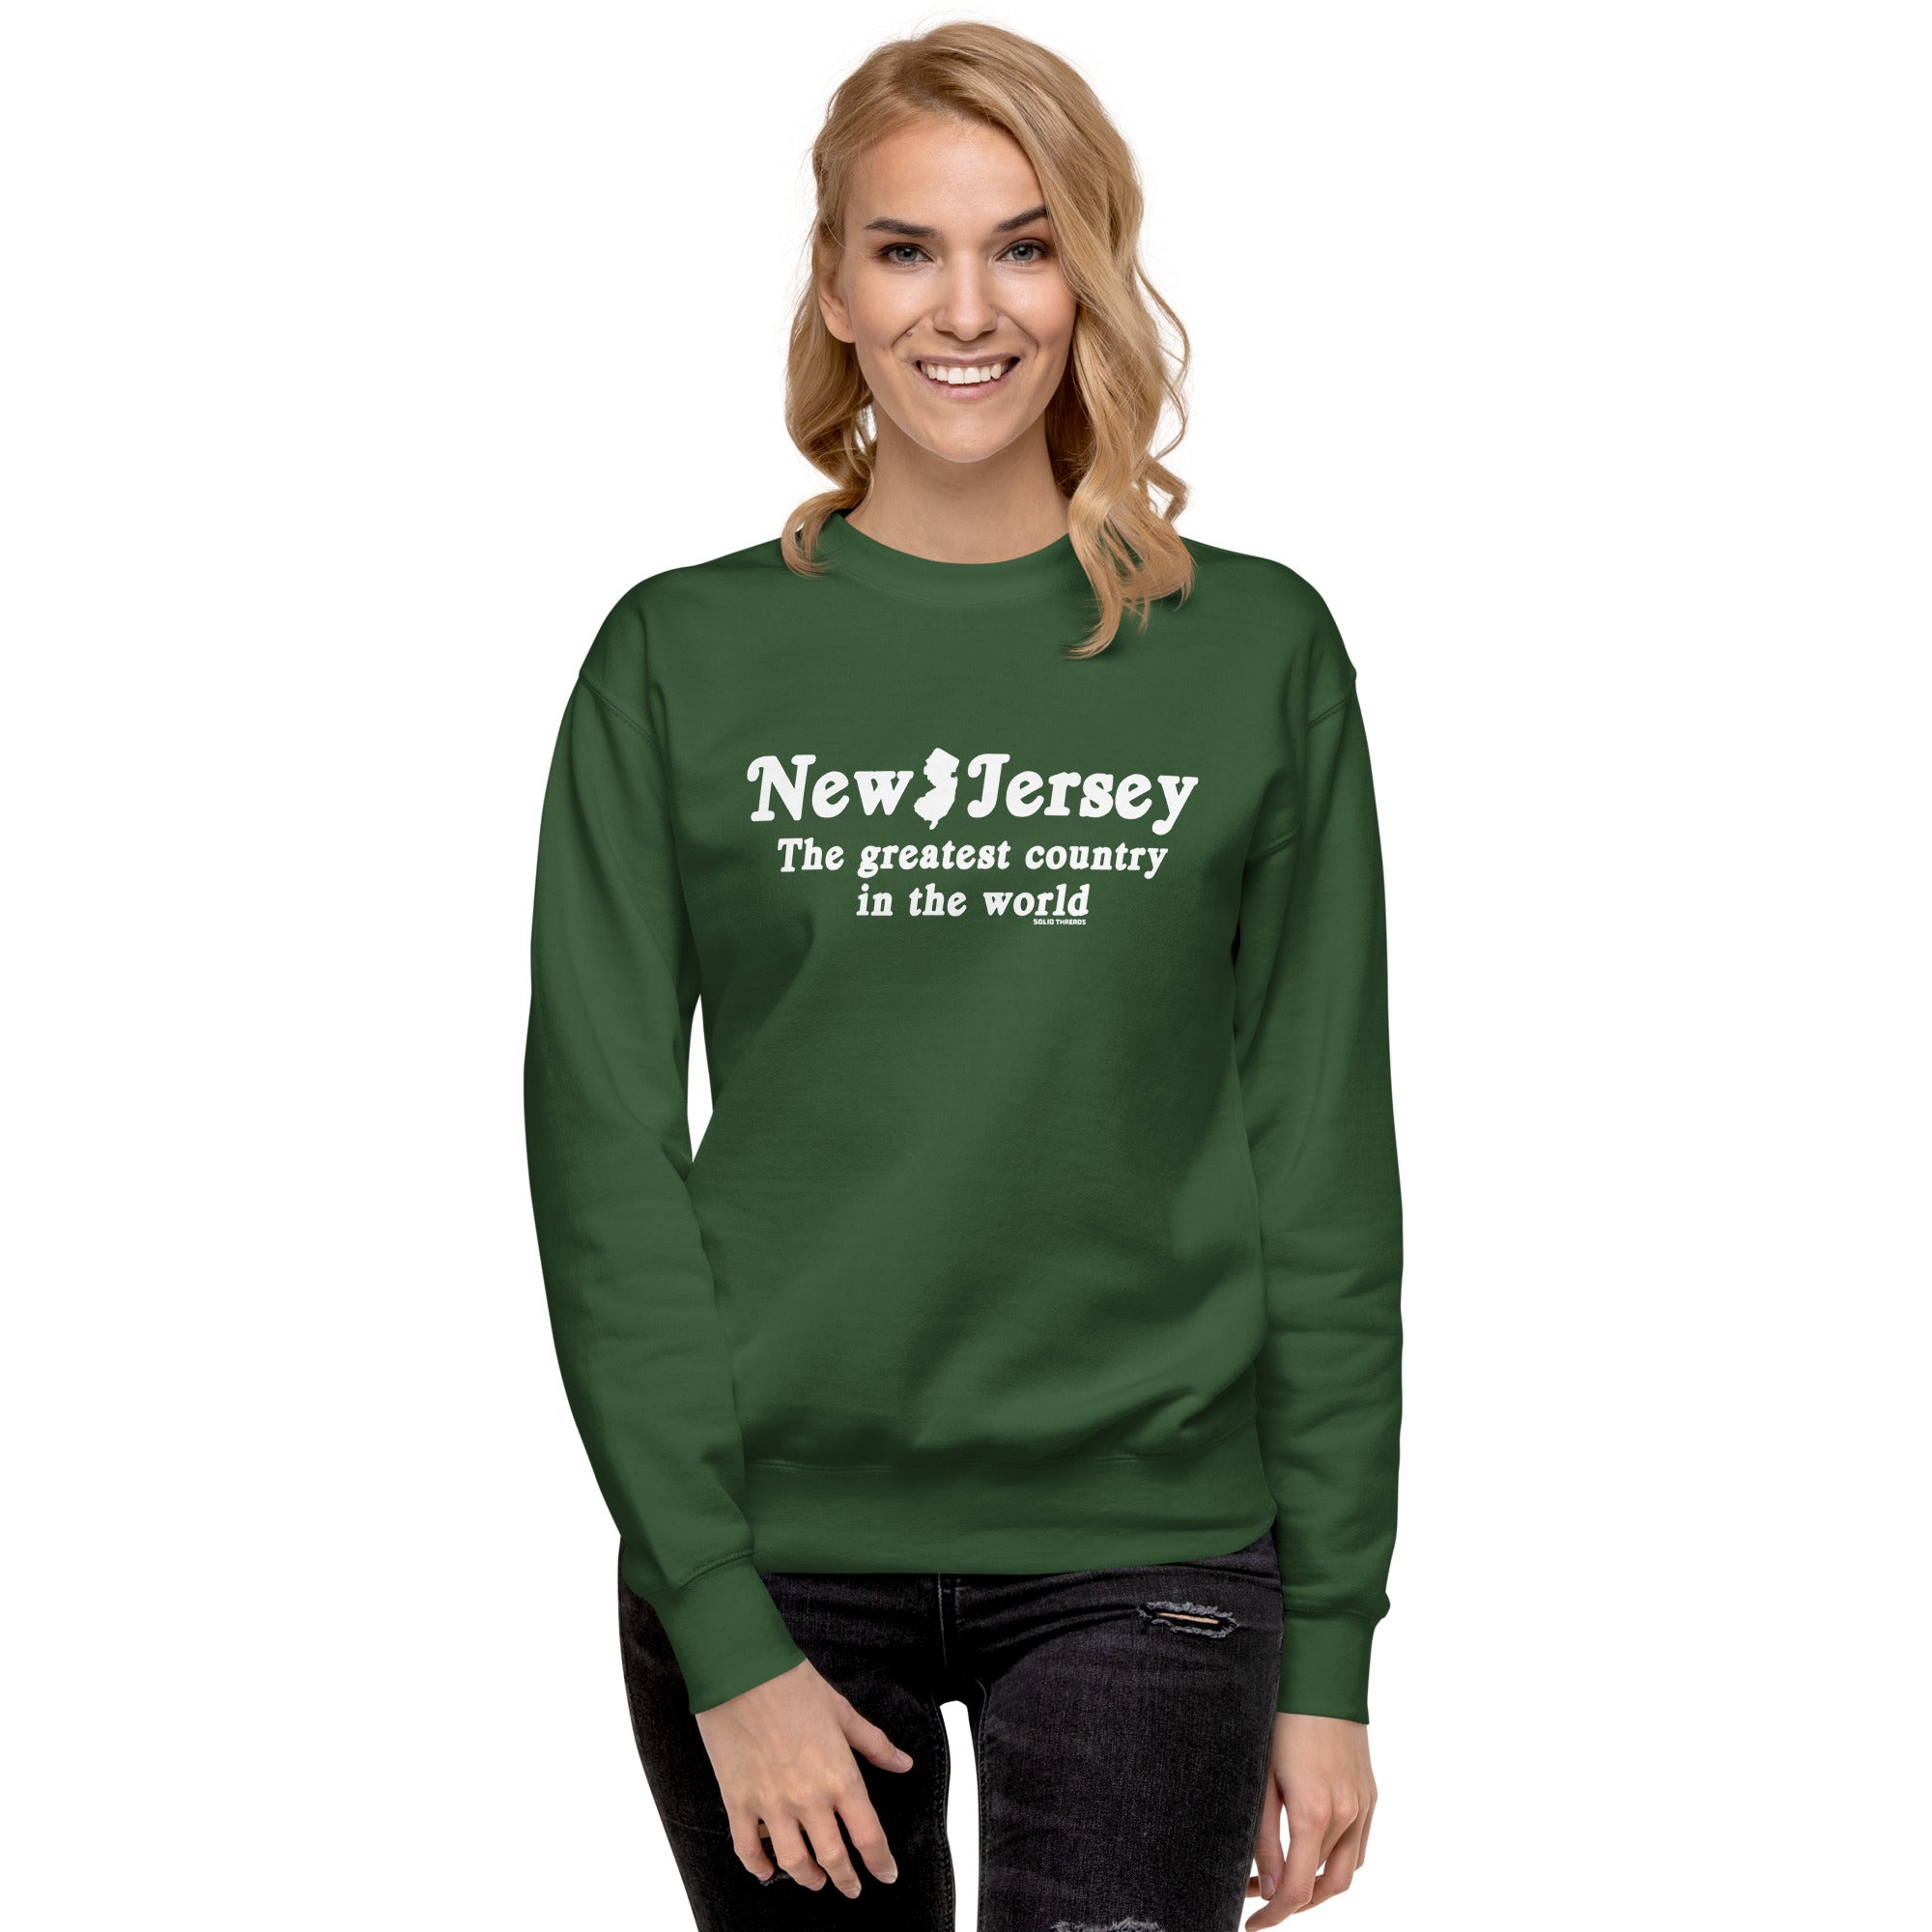 New Jersey The Greatest Country In The World Vintage Classic Sweatshirt | Funny Garden State Fleece on Model | Solid Threads